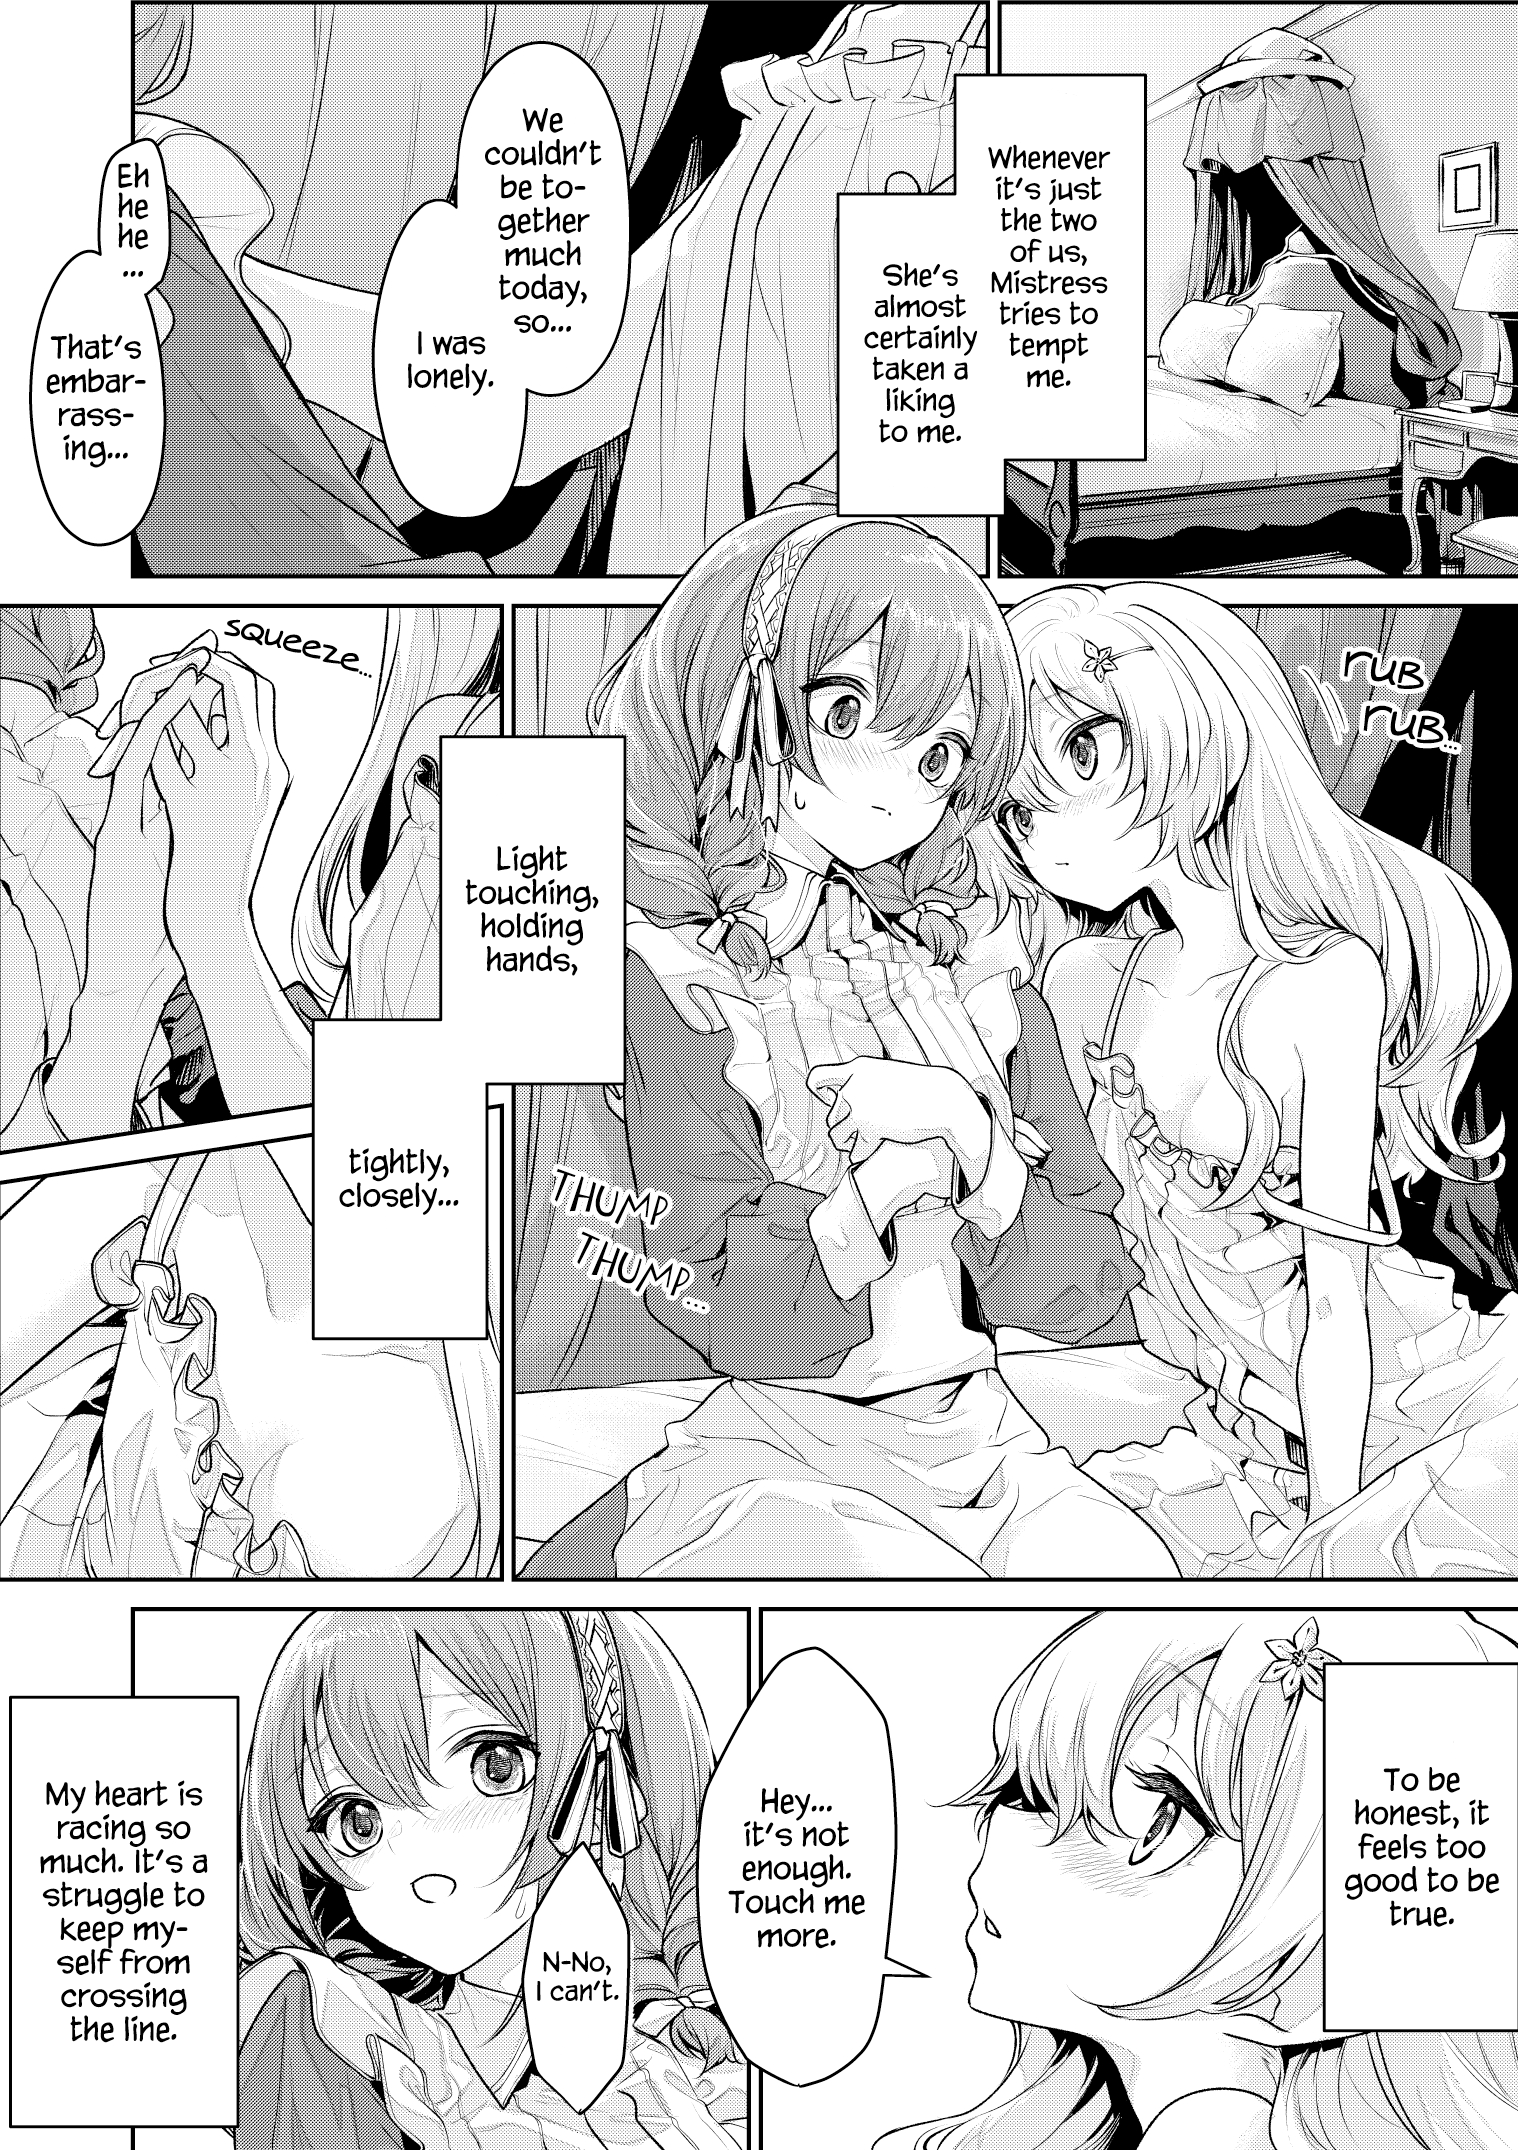 A Mistress Who Tempts Her Maid chapter 1 - page 2